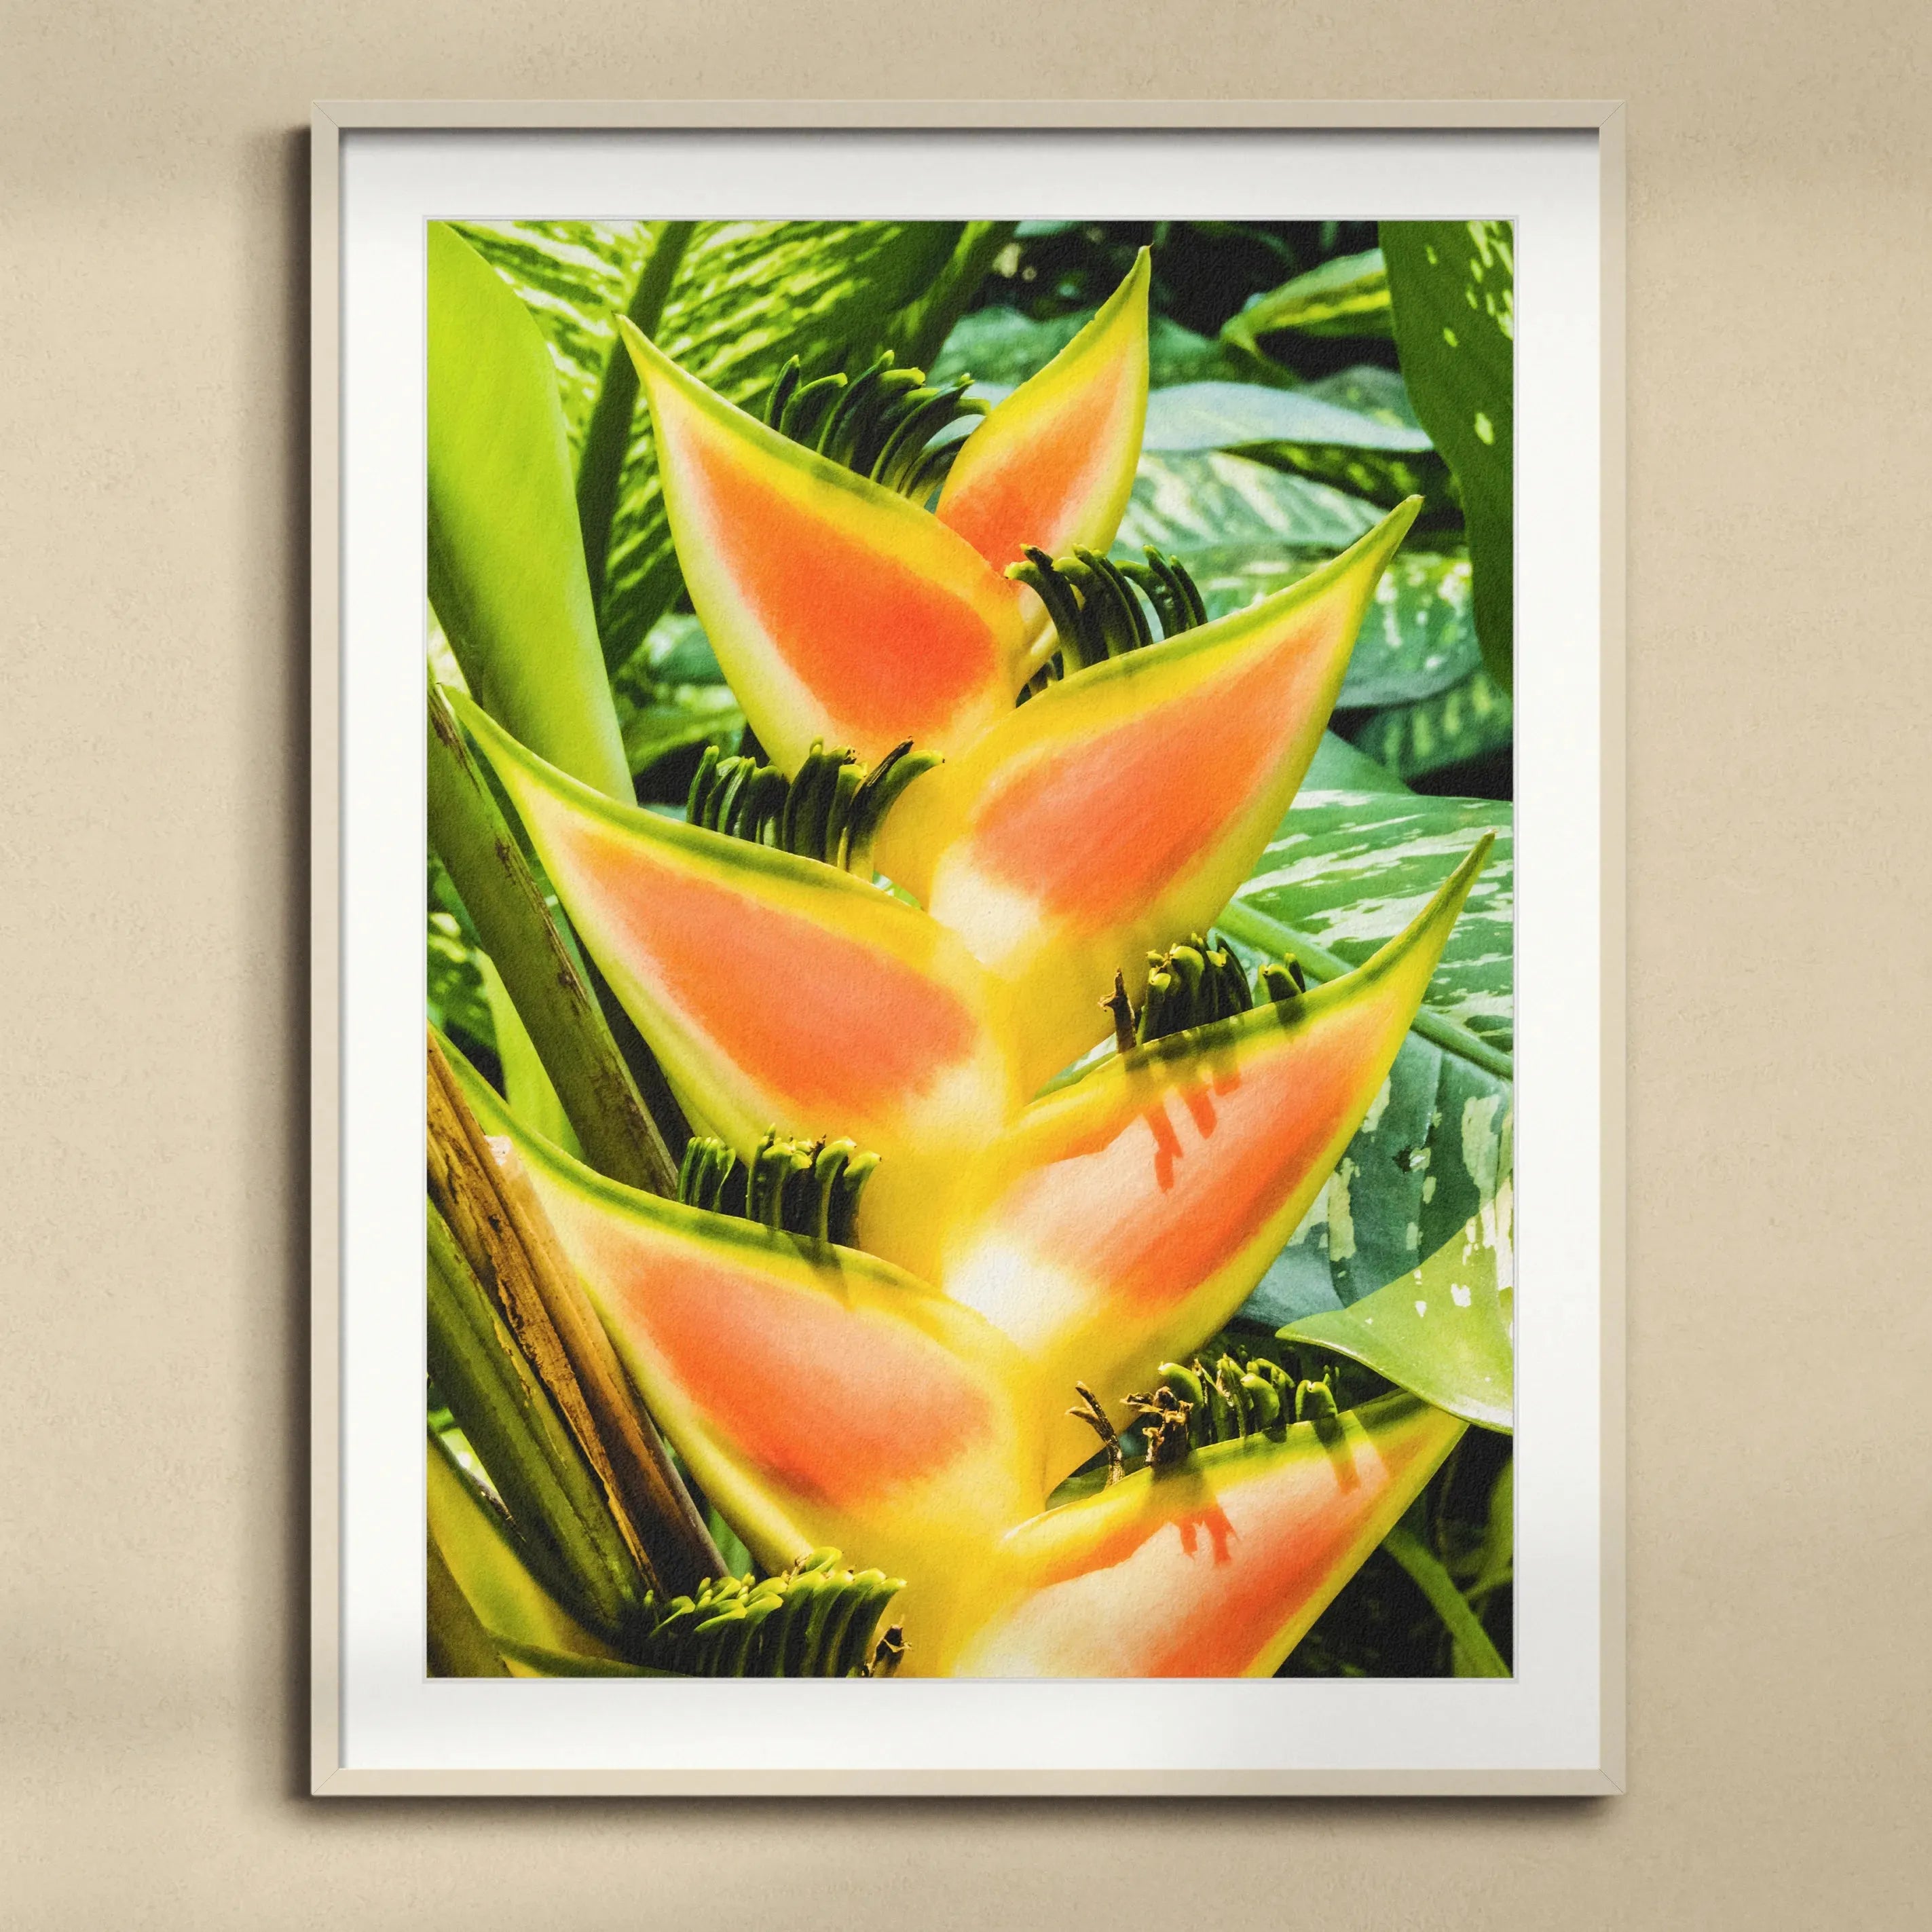 Showstopper Framed & Mounted Print - Posters Prints & Visual Artwork - Aesthetic Art